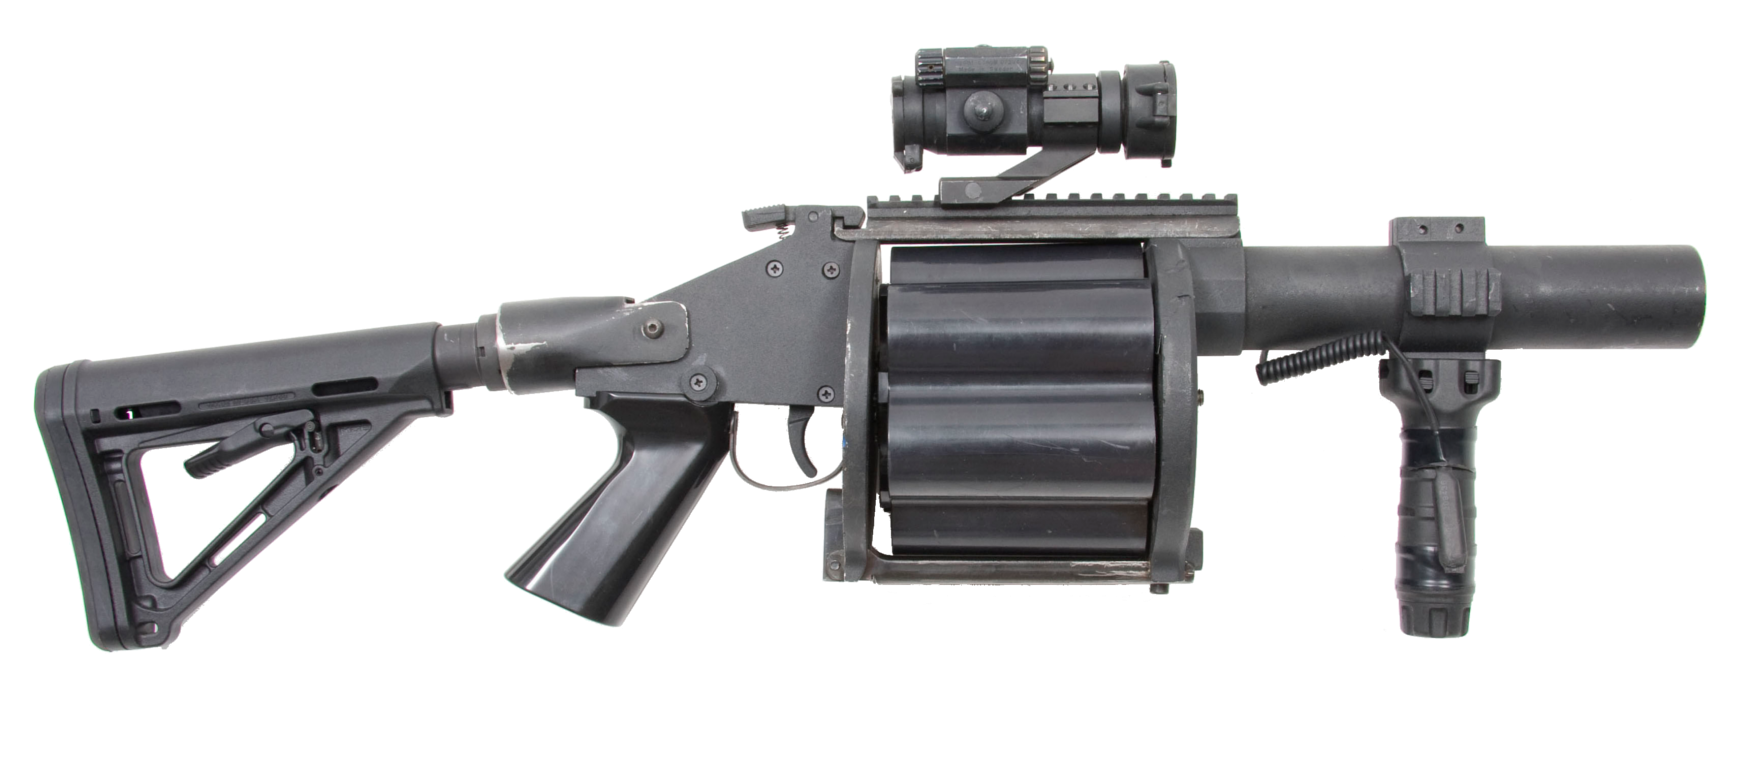 Grenade Launcher PNG Image High Quality PNG Image